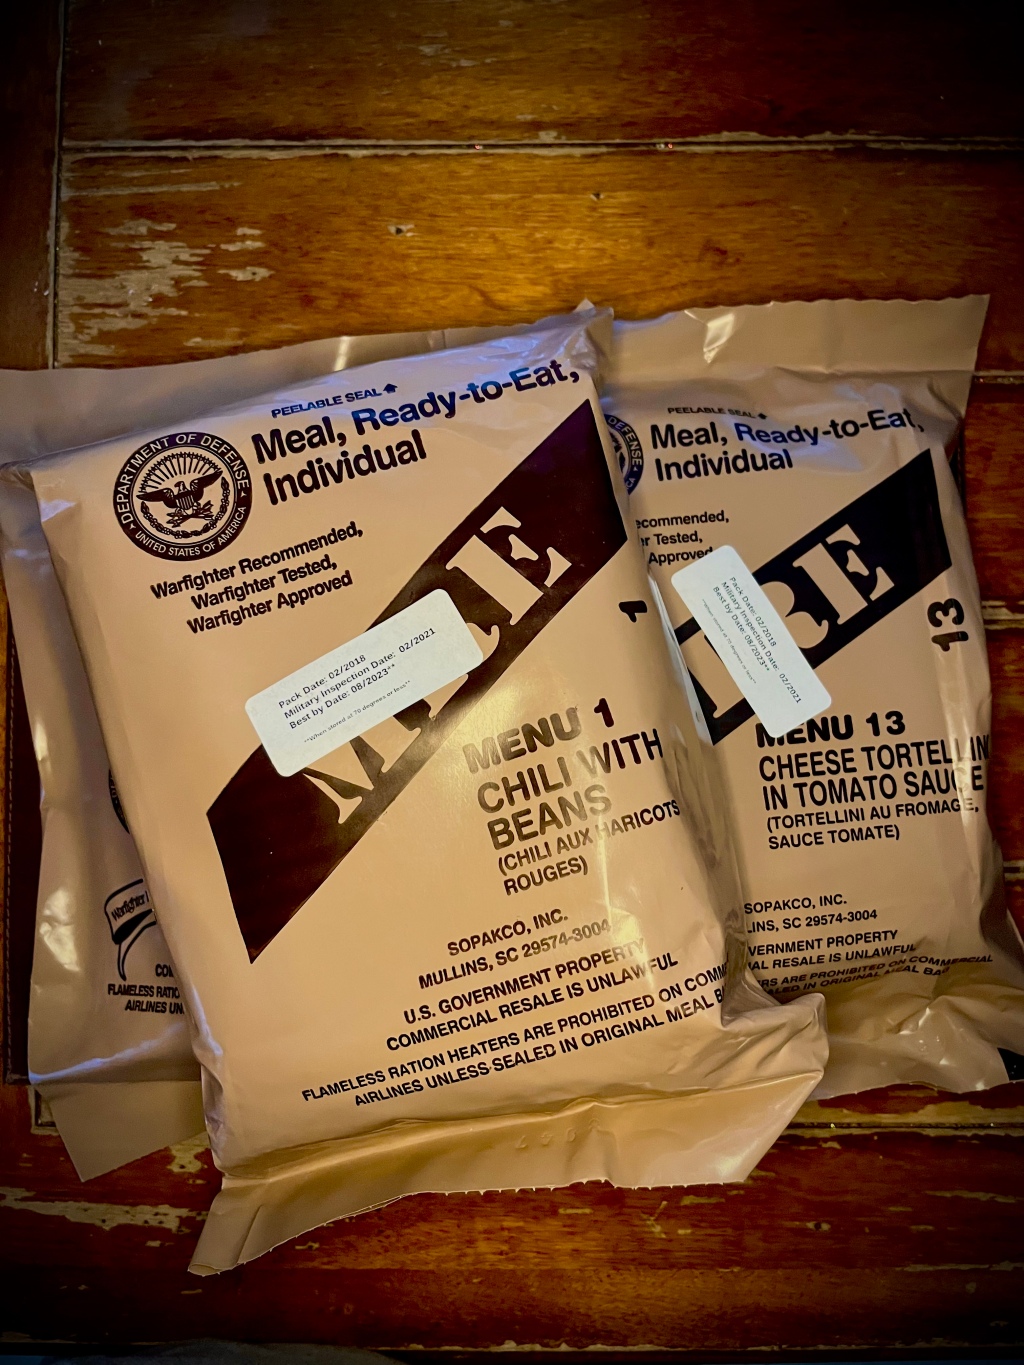 Are MREs Good for Camping?